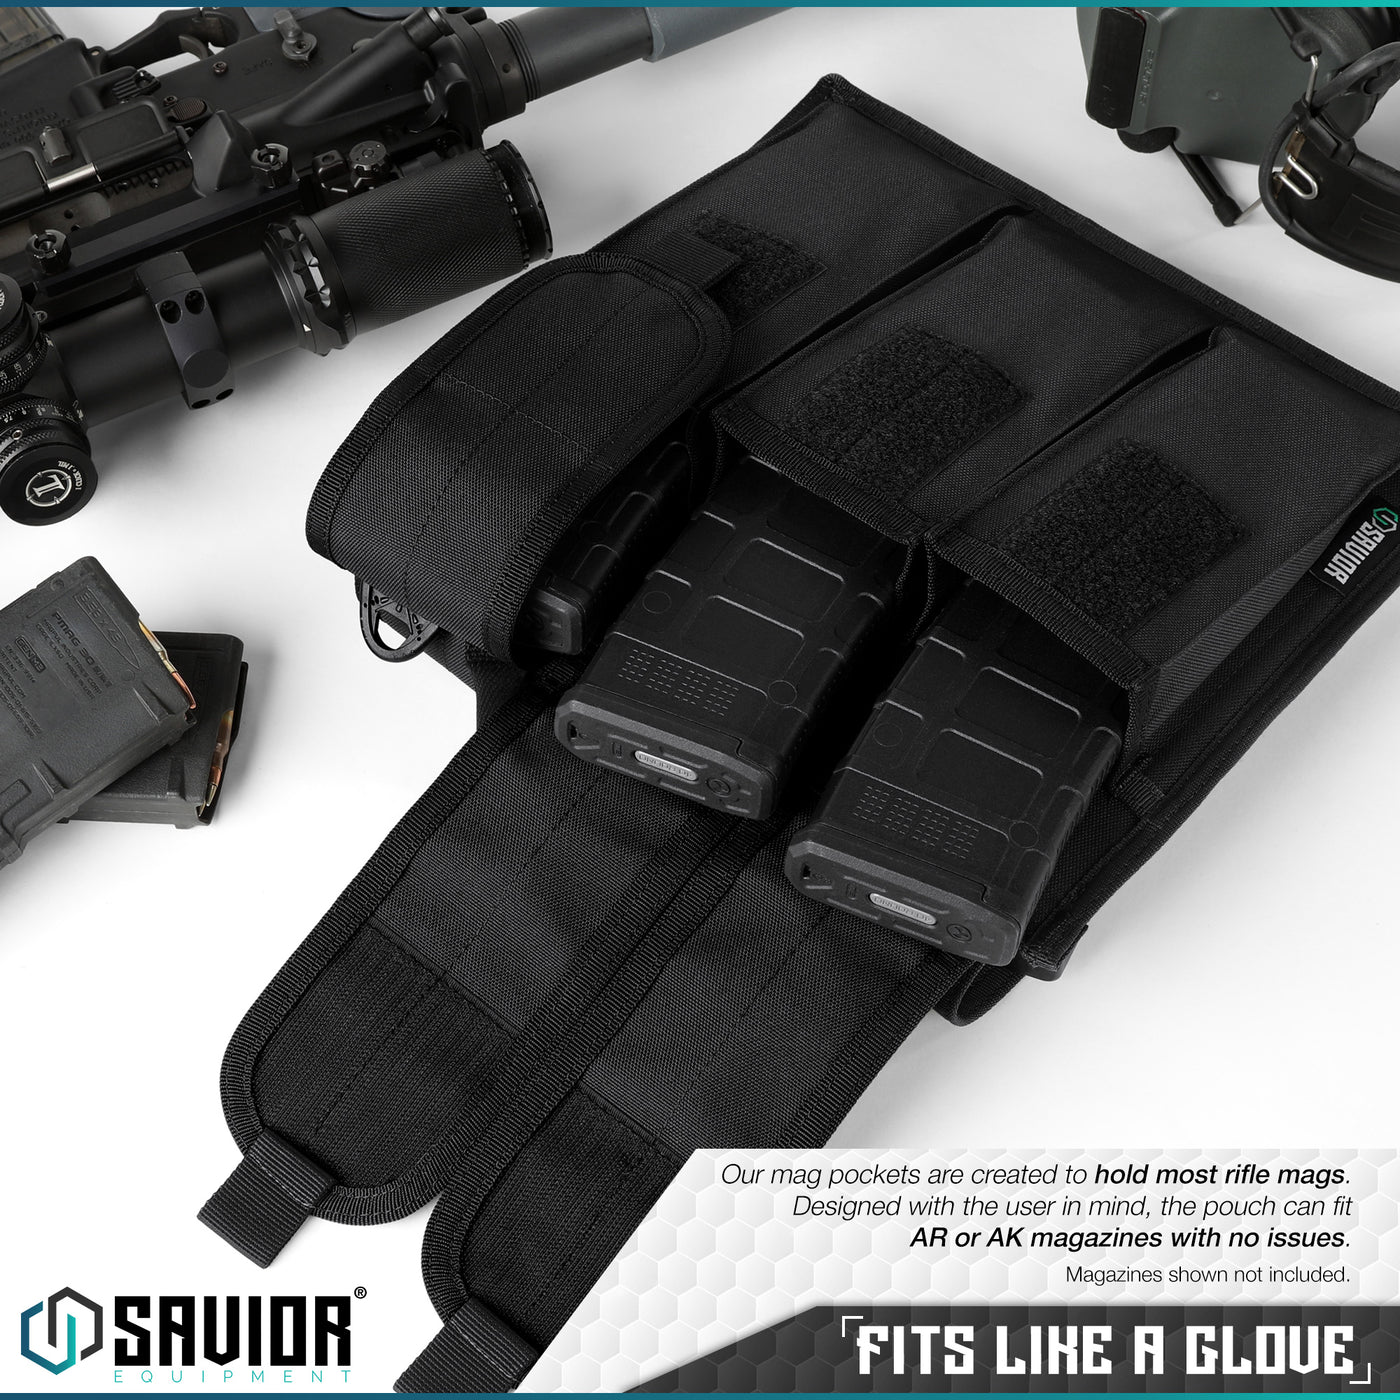 Fits Like a Glove - Our mag pockets are created to hold most rifle mags. Designed with the user in mind, the pouch can fit AR or AK magazines with no issues. Magazines shown not included.